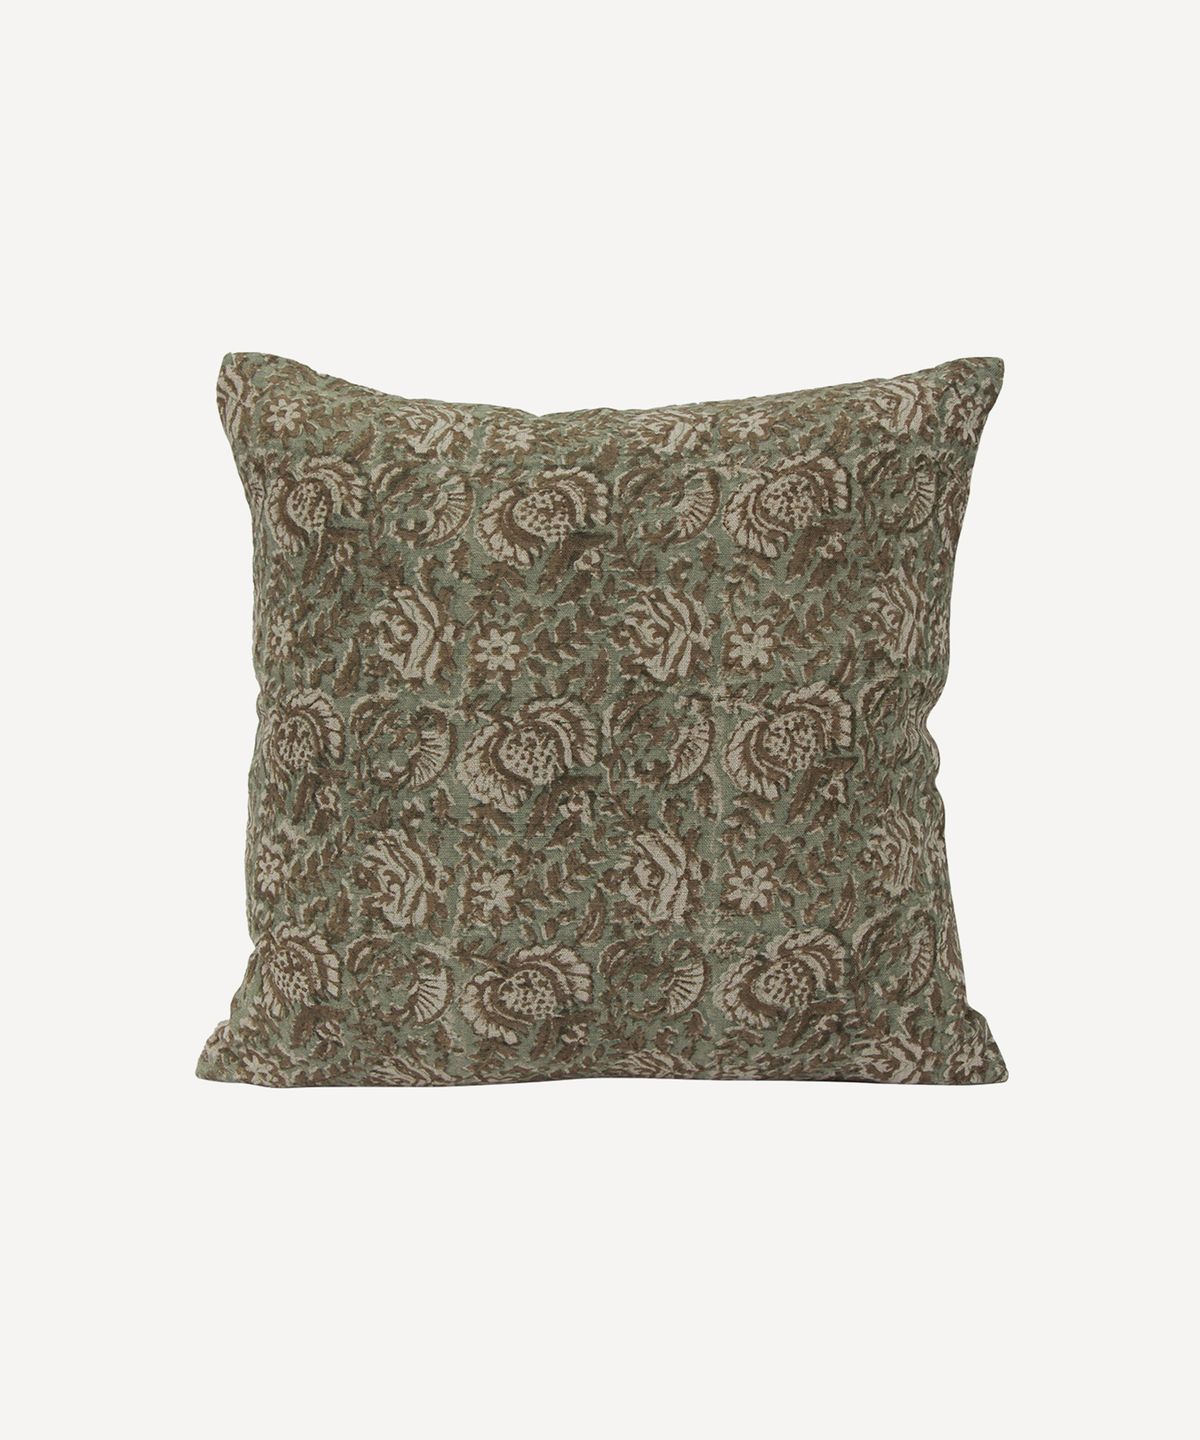 Luda Floral Cushion Cover